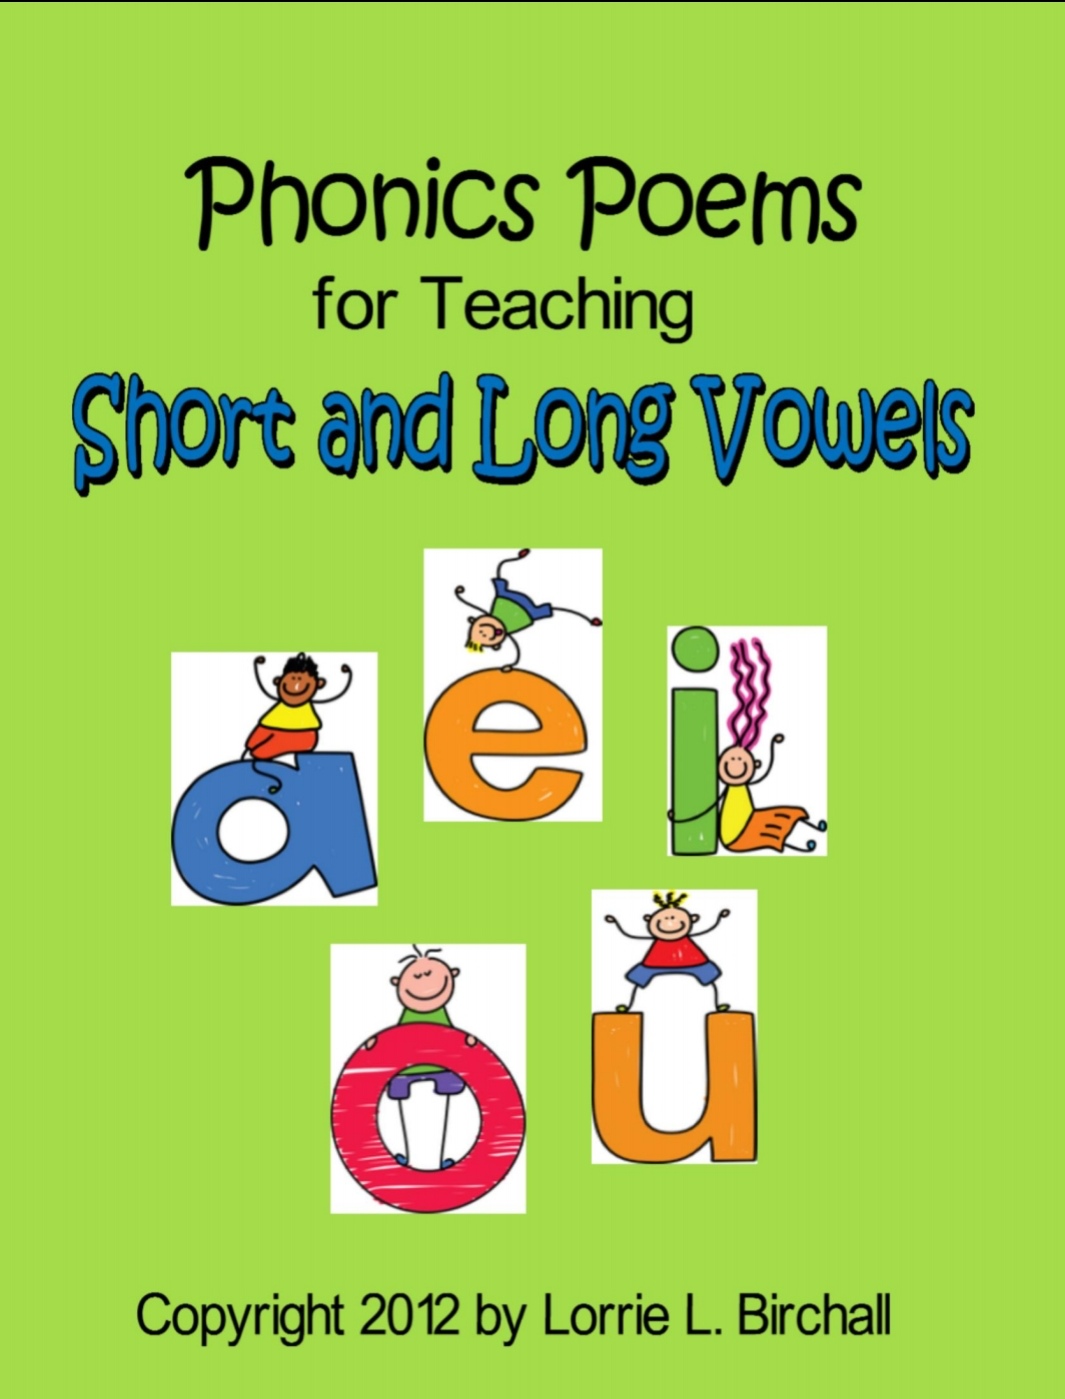 phonics-poems-for-teaching-short-and-long-vowels